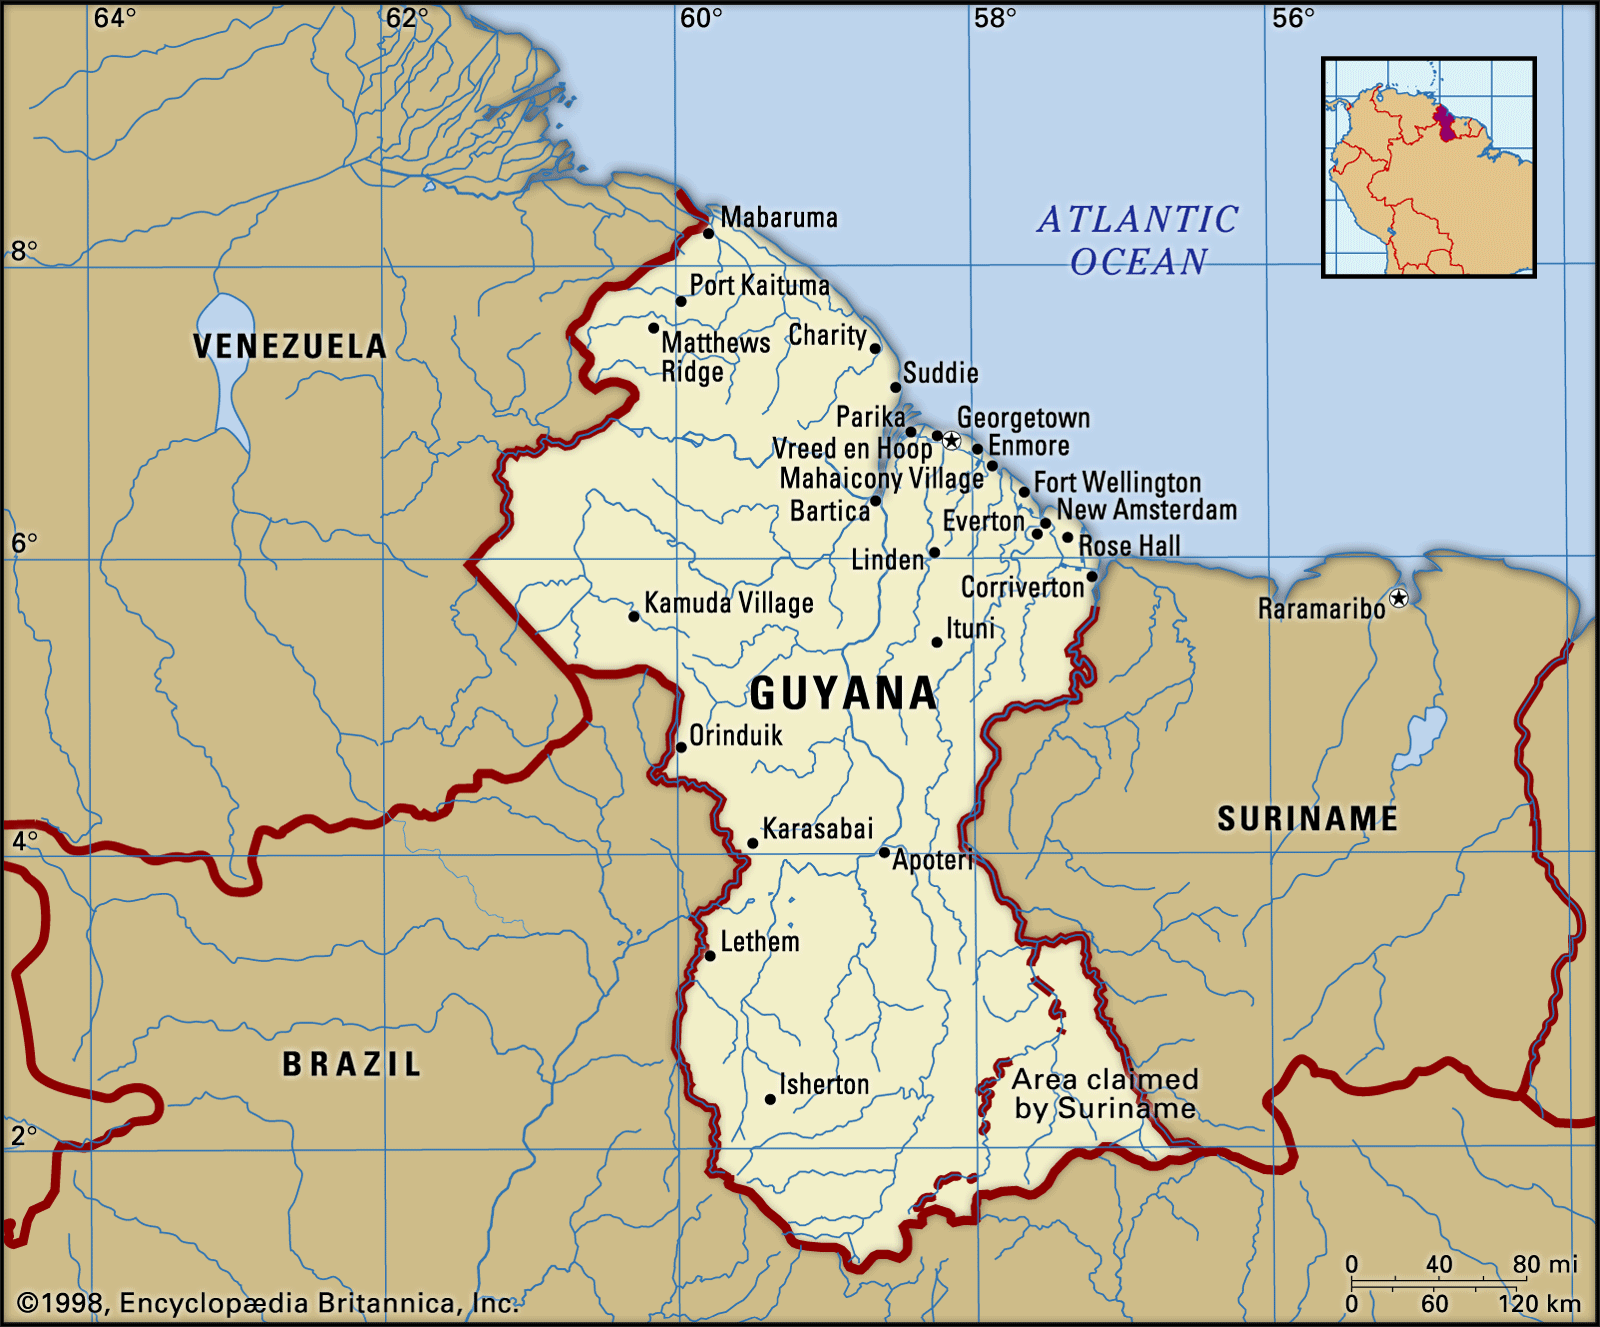 In its latest travel health notice, the United States’ Centers for Disease Control and Prevention (CDC) has listed Guyana as a country where there is a very high risk of contracting COVID-19 and has warned against travelling here.